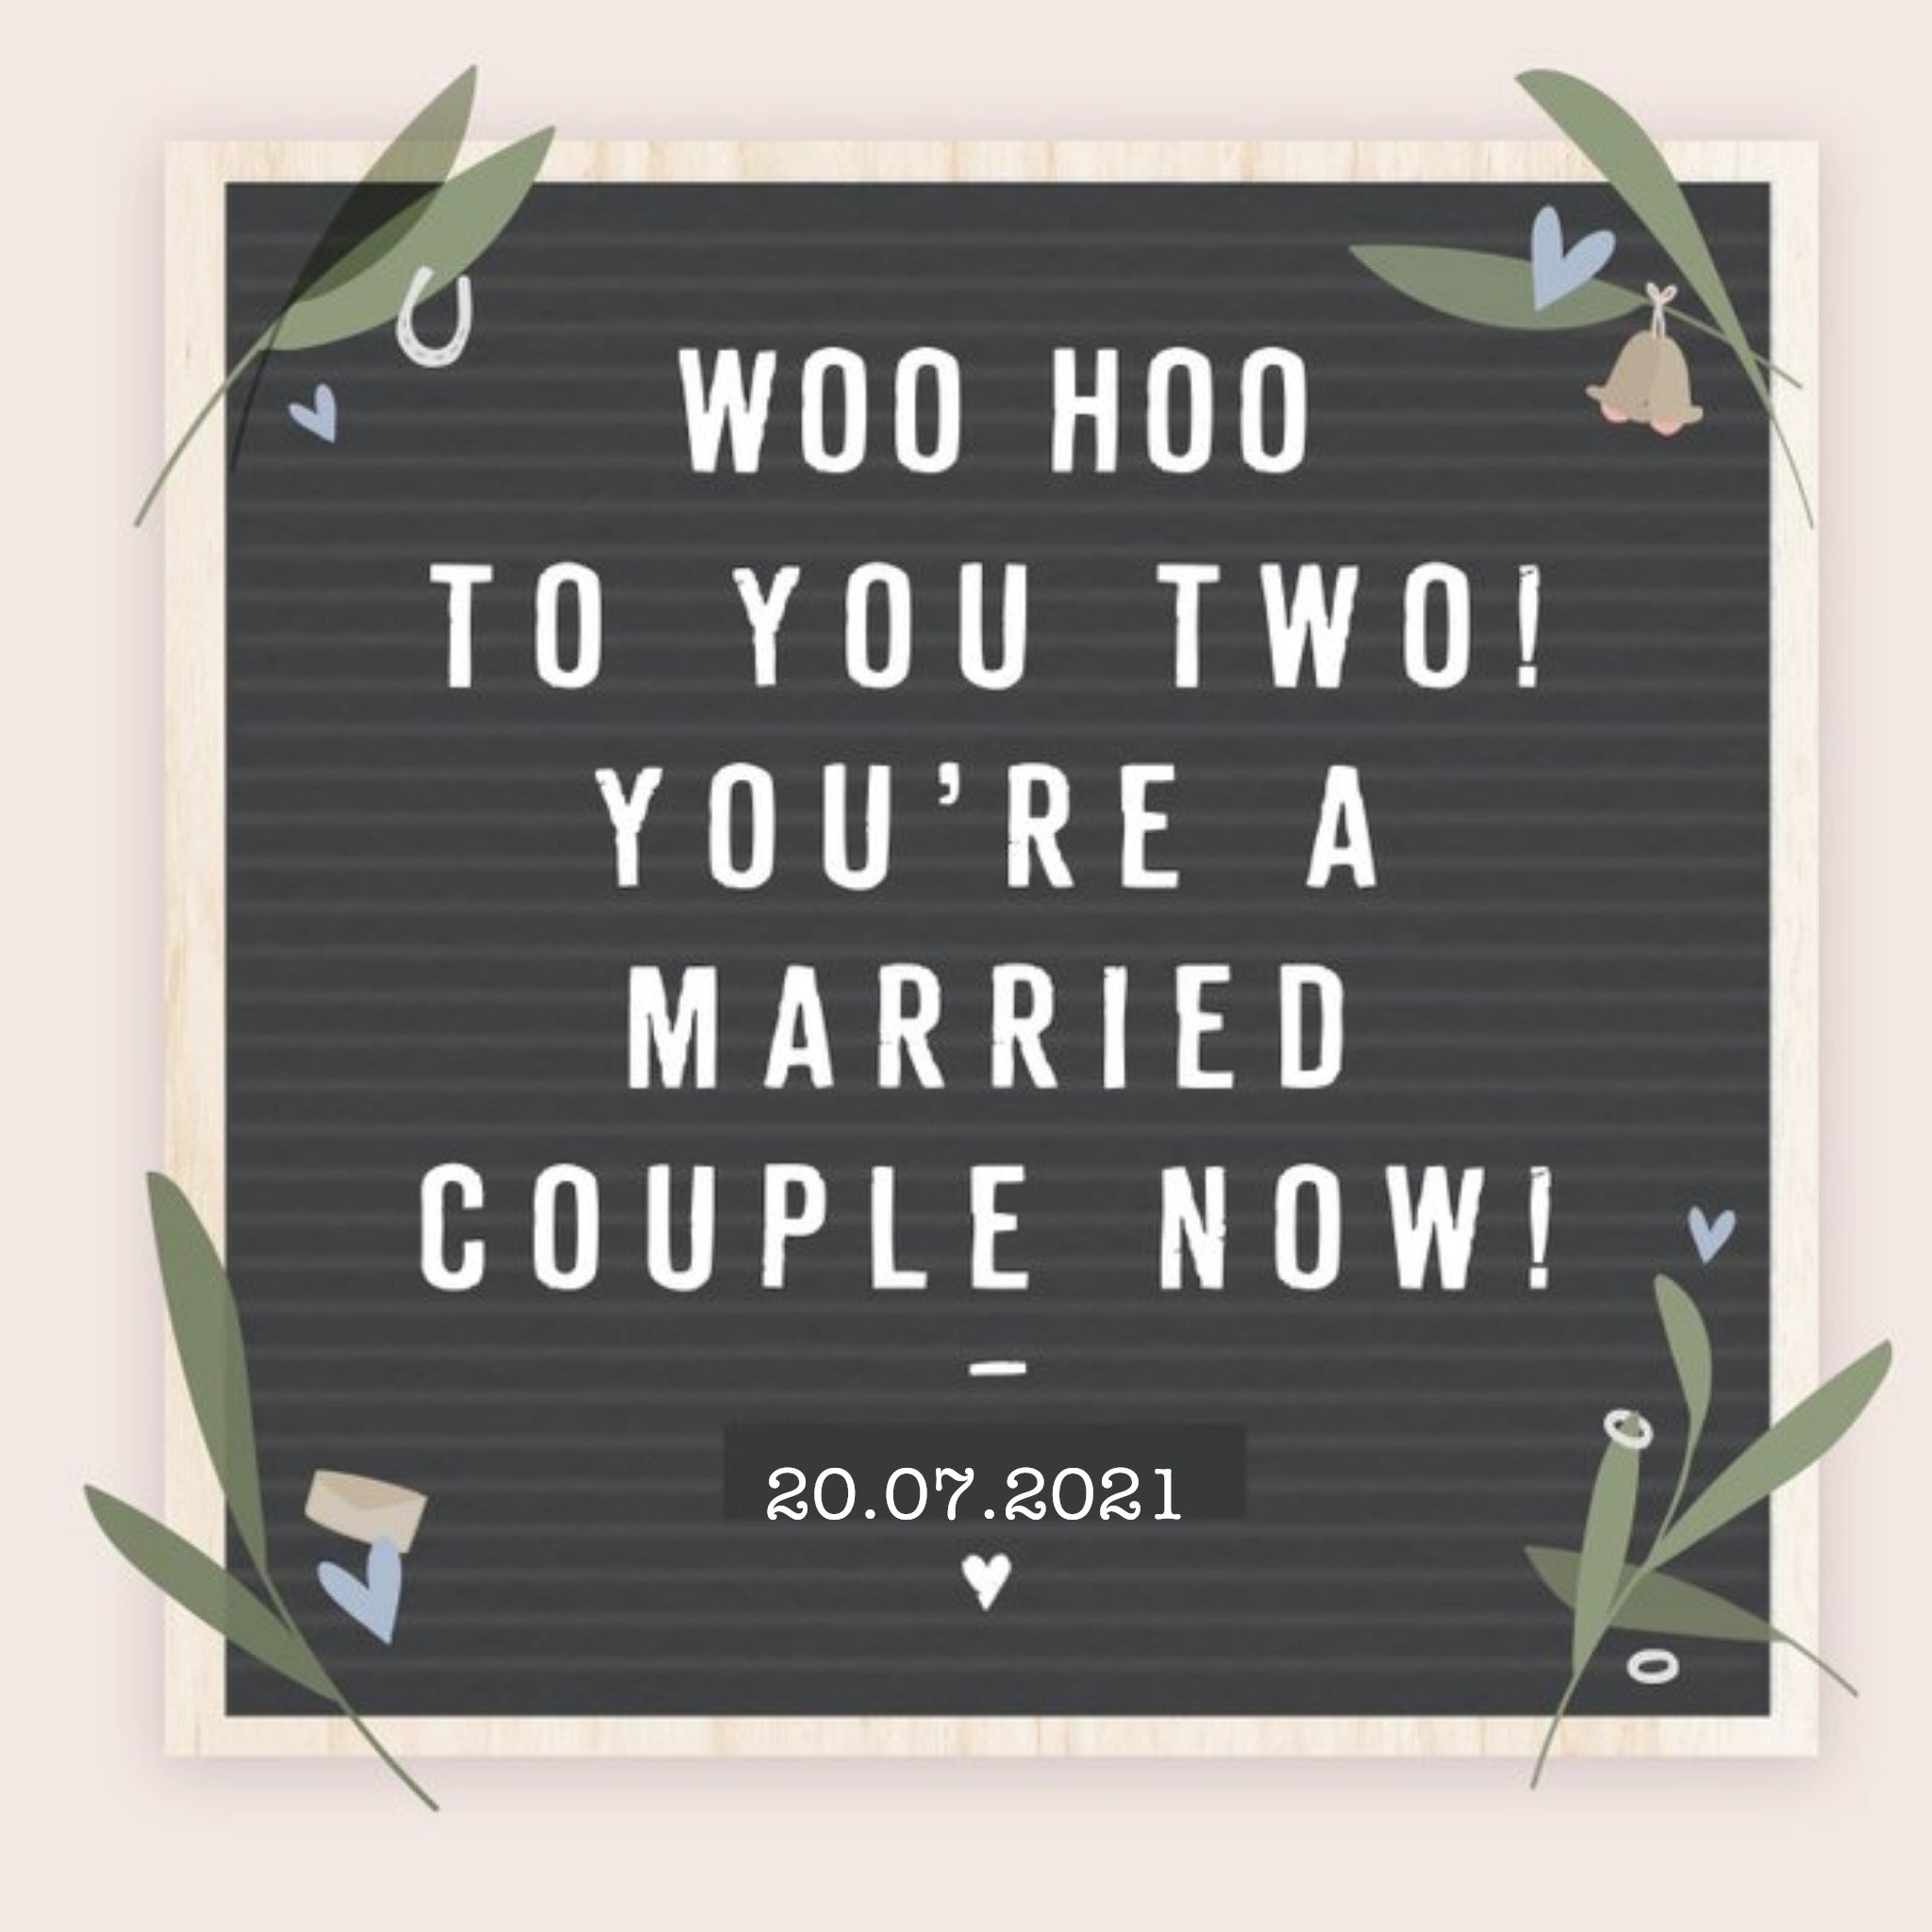 Moonpig Woo Hoo To You Two You Are A Married Couple Now Wedding Congratulations Card, Large